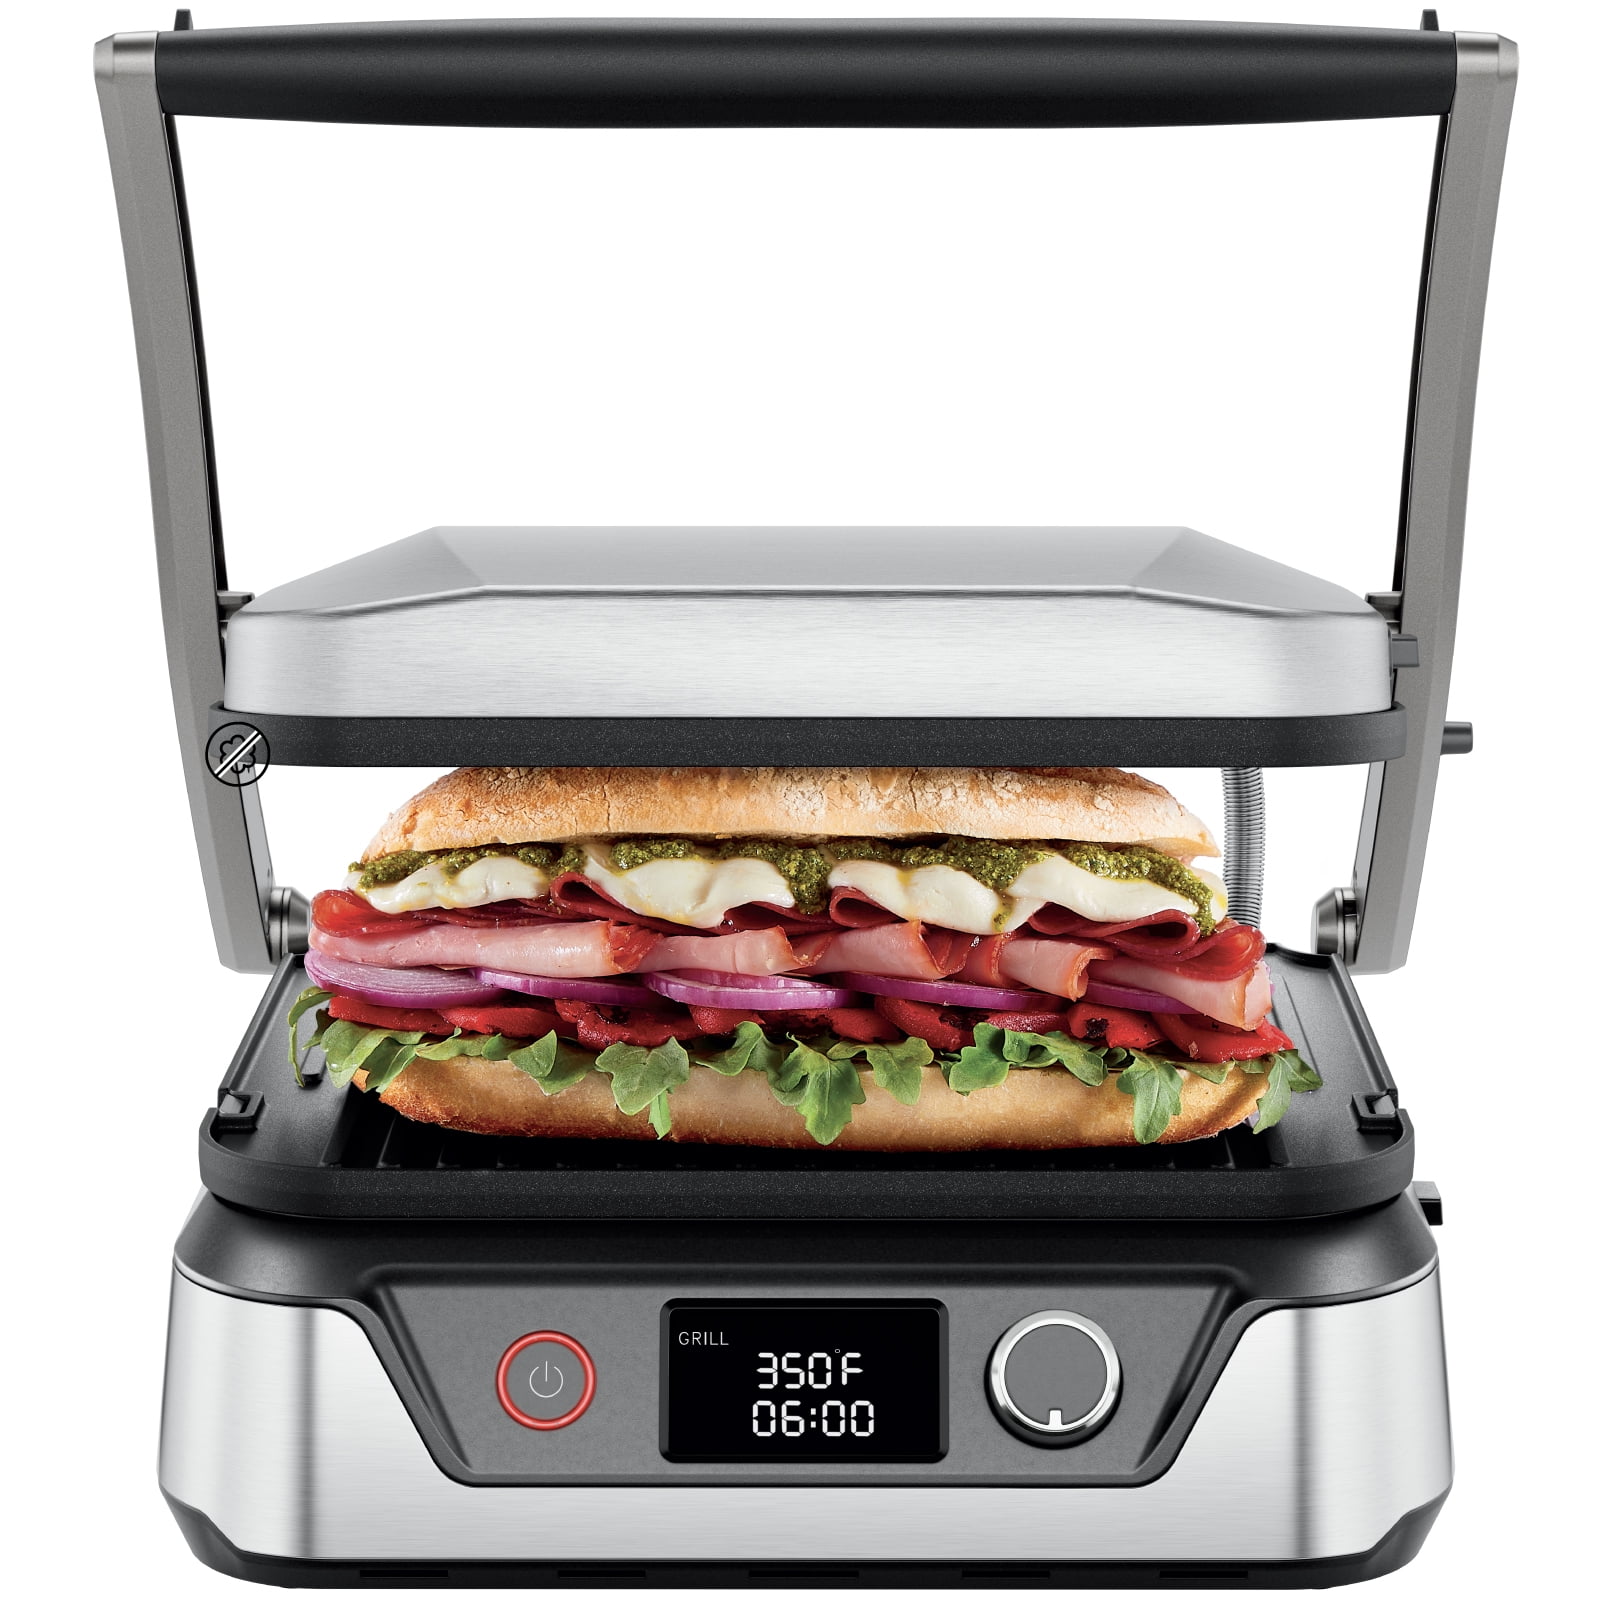 Panini Grill - Definition and Cooking Information 